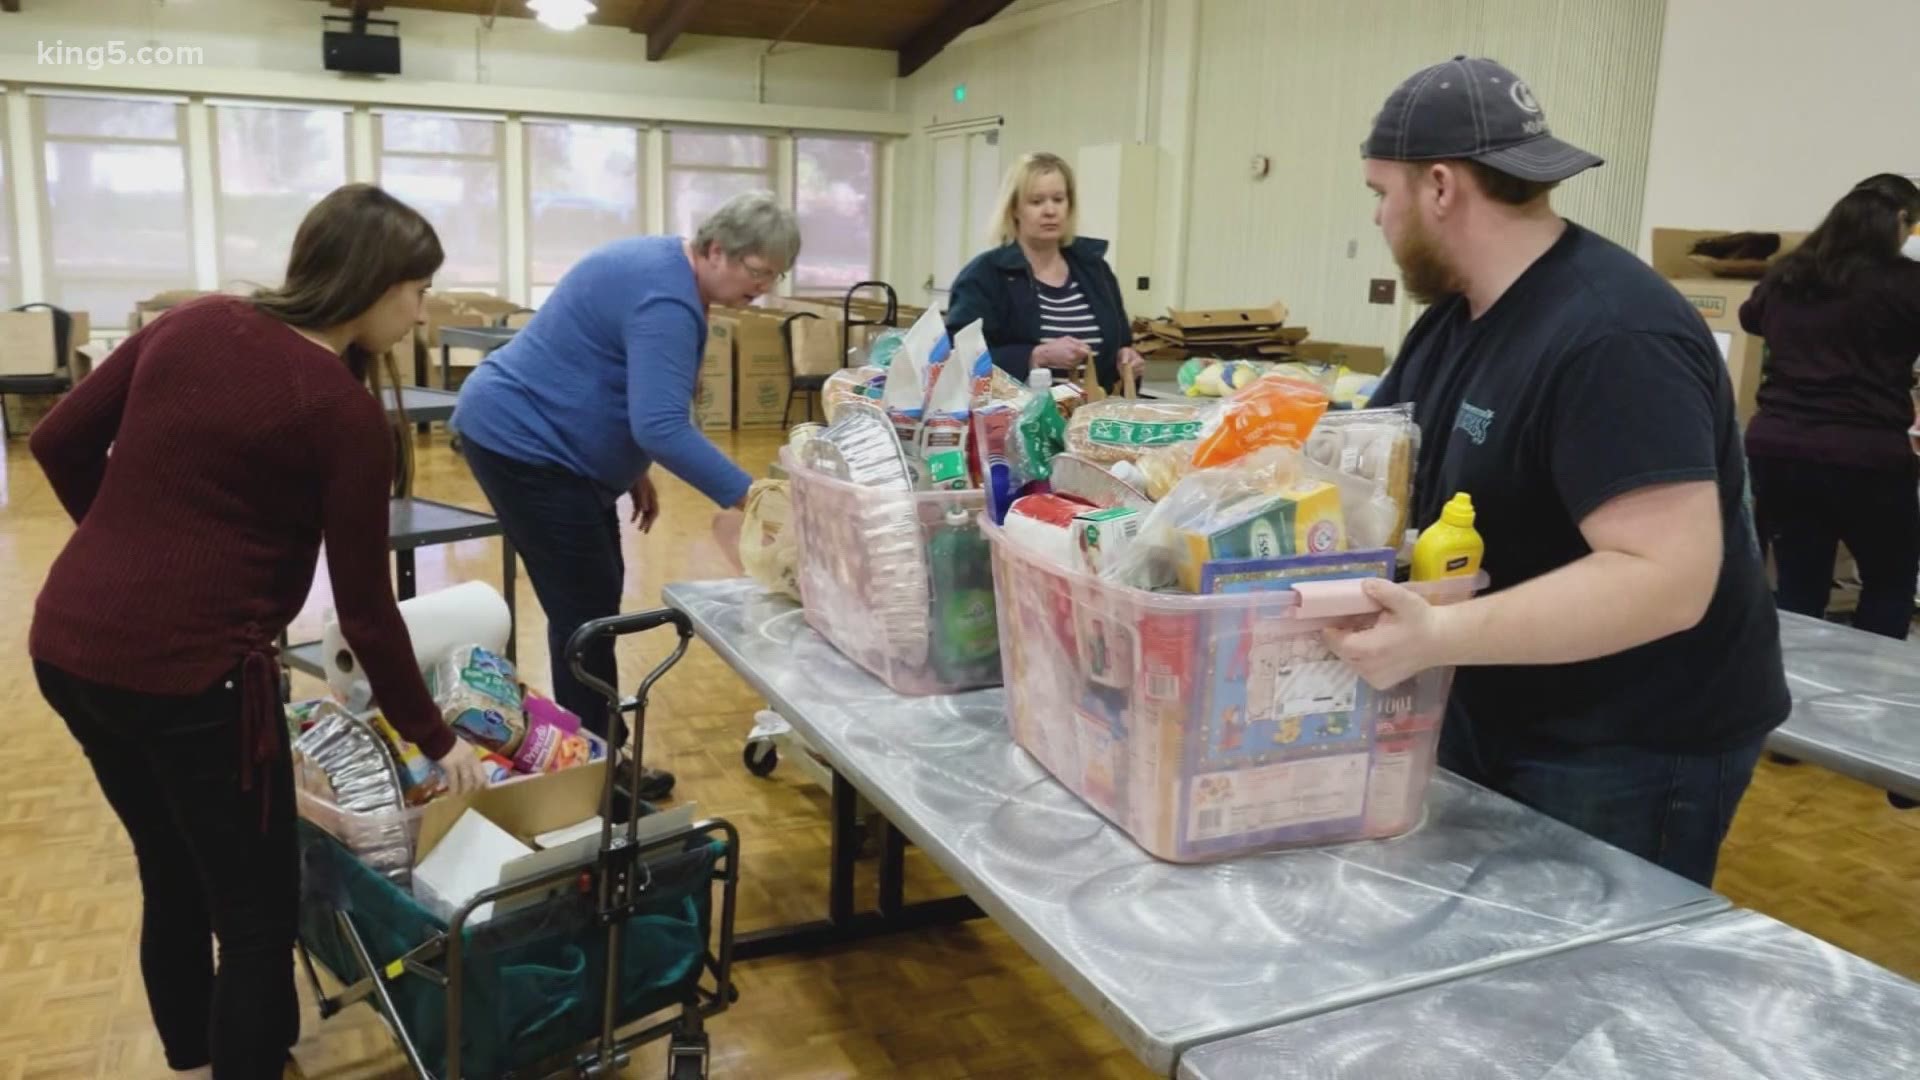 Nursing students at PLU made big changes to a Thanksgiving food drive to make sure it could go on for families struggling this year.